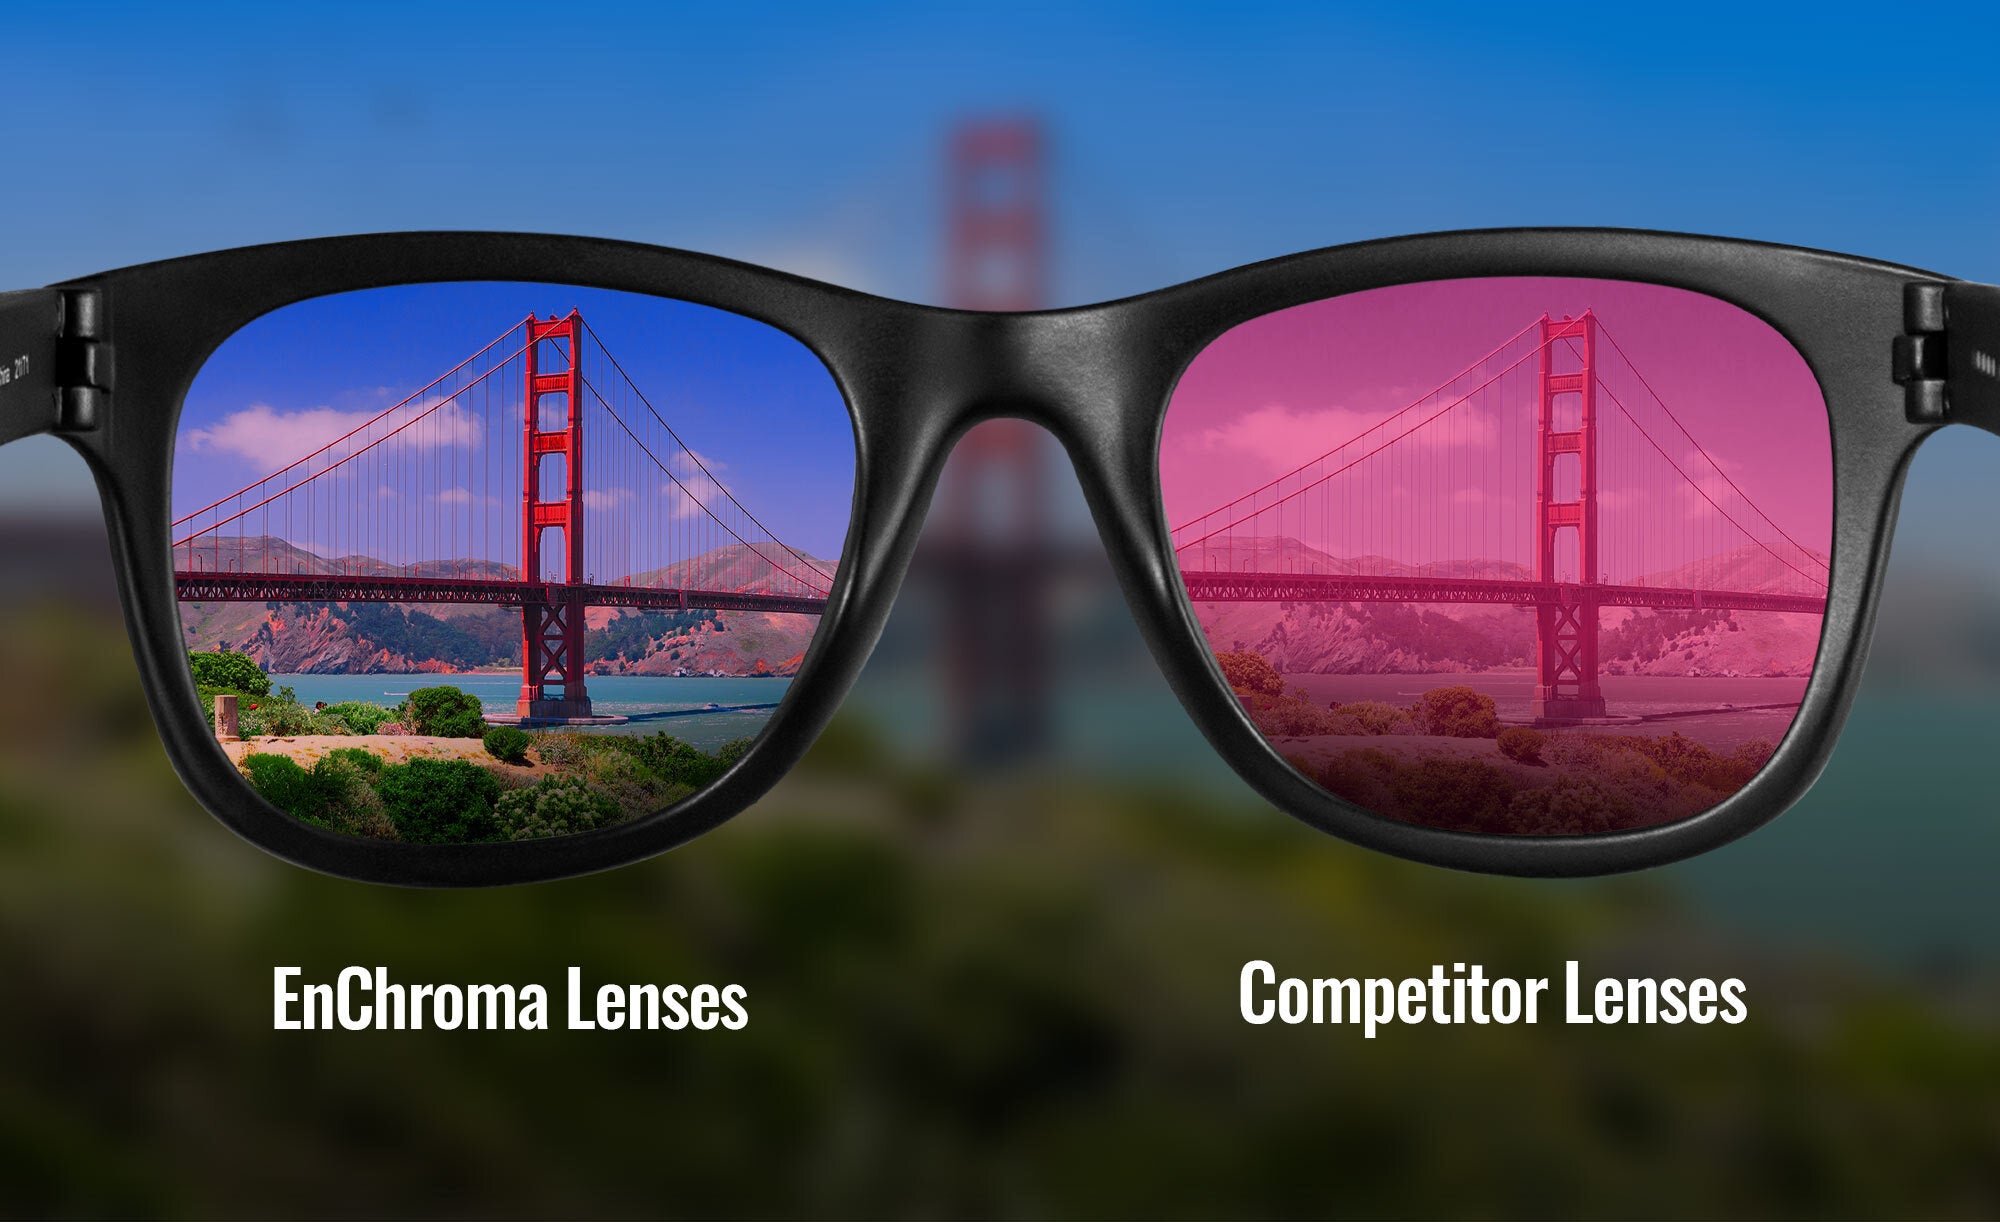 What Makes EnChroma Glasses Different from the Competition?